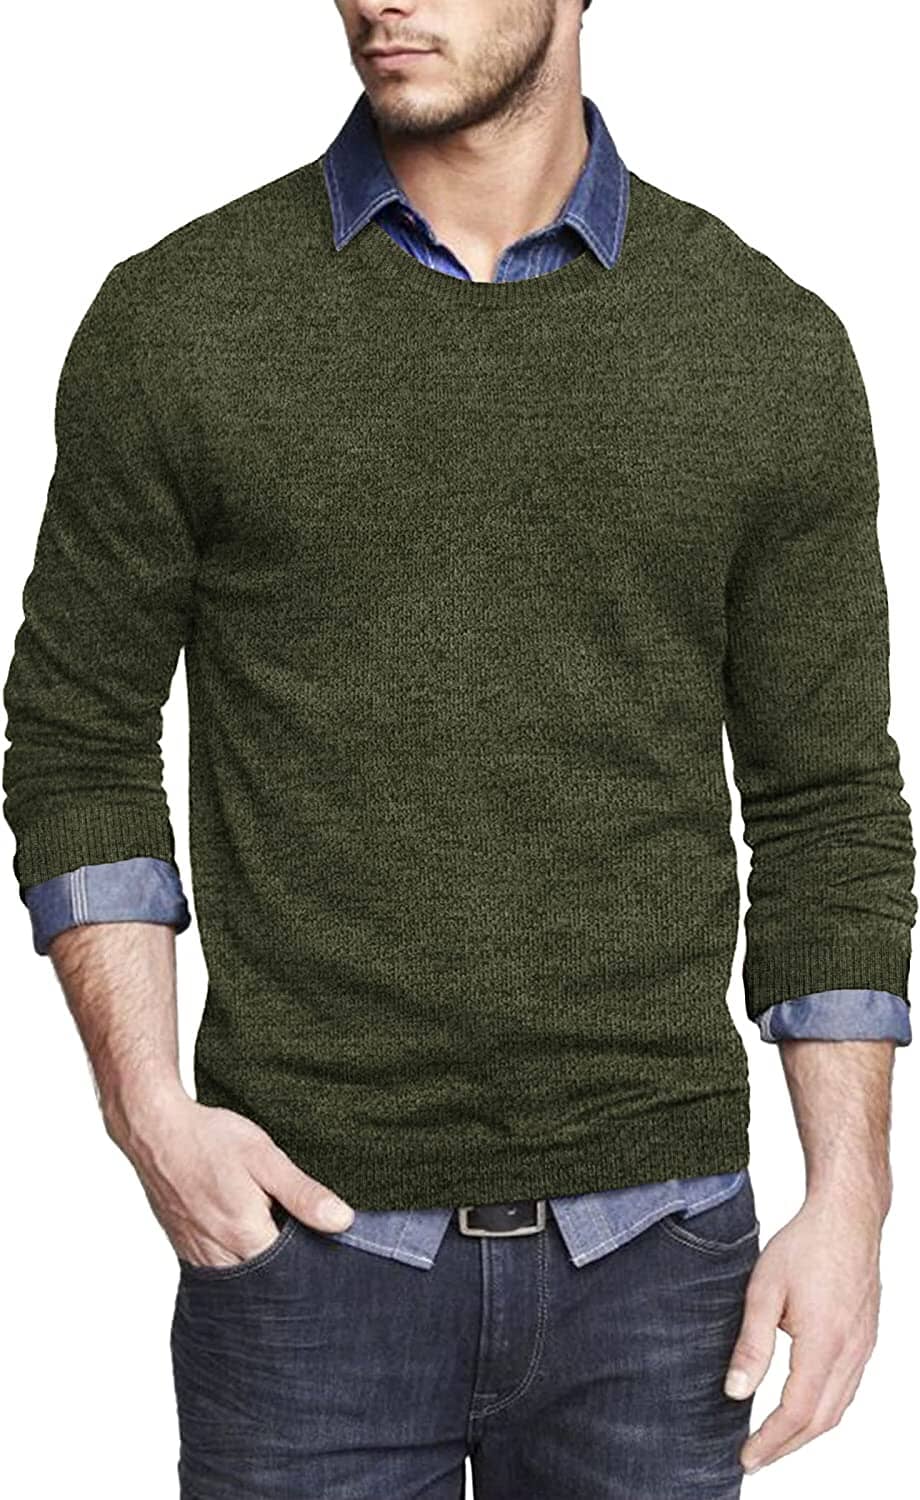 Solid Classic Crew Neck Sweater (US Only) Sweaters COOFANDY Store Black and Army Green S 